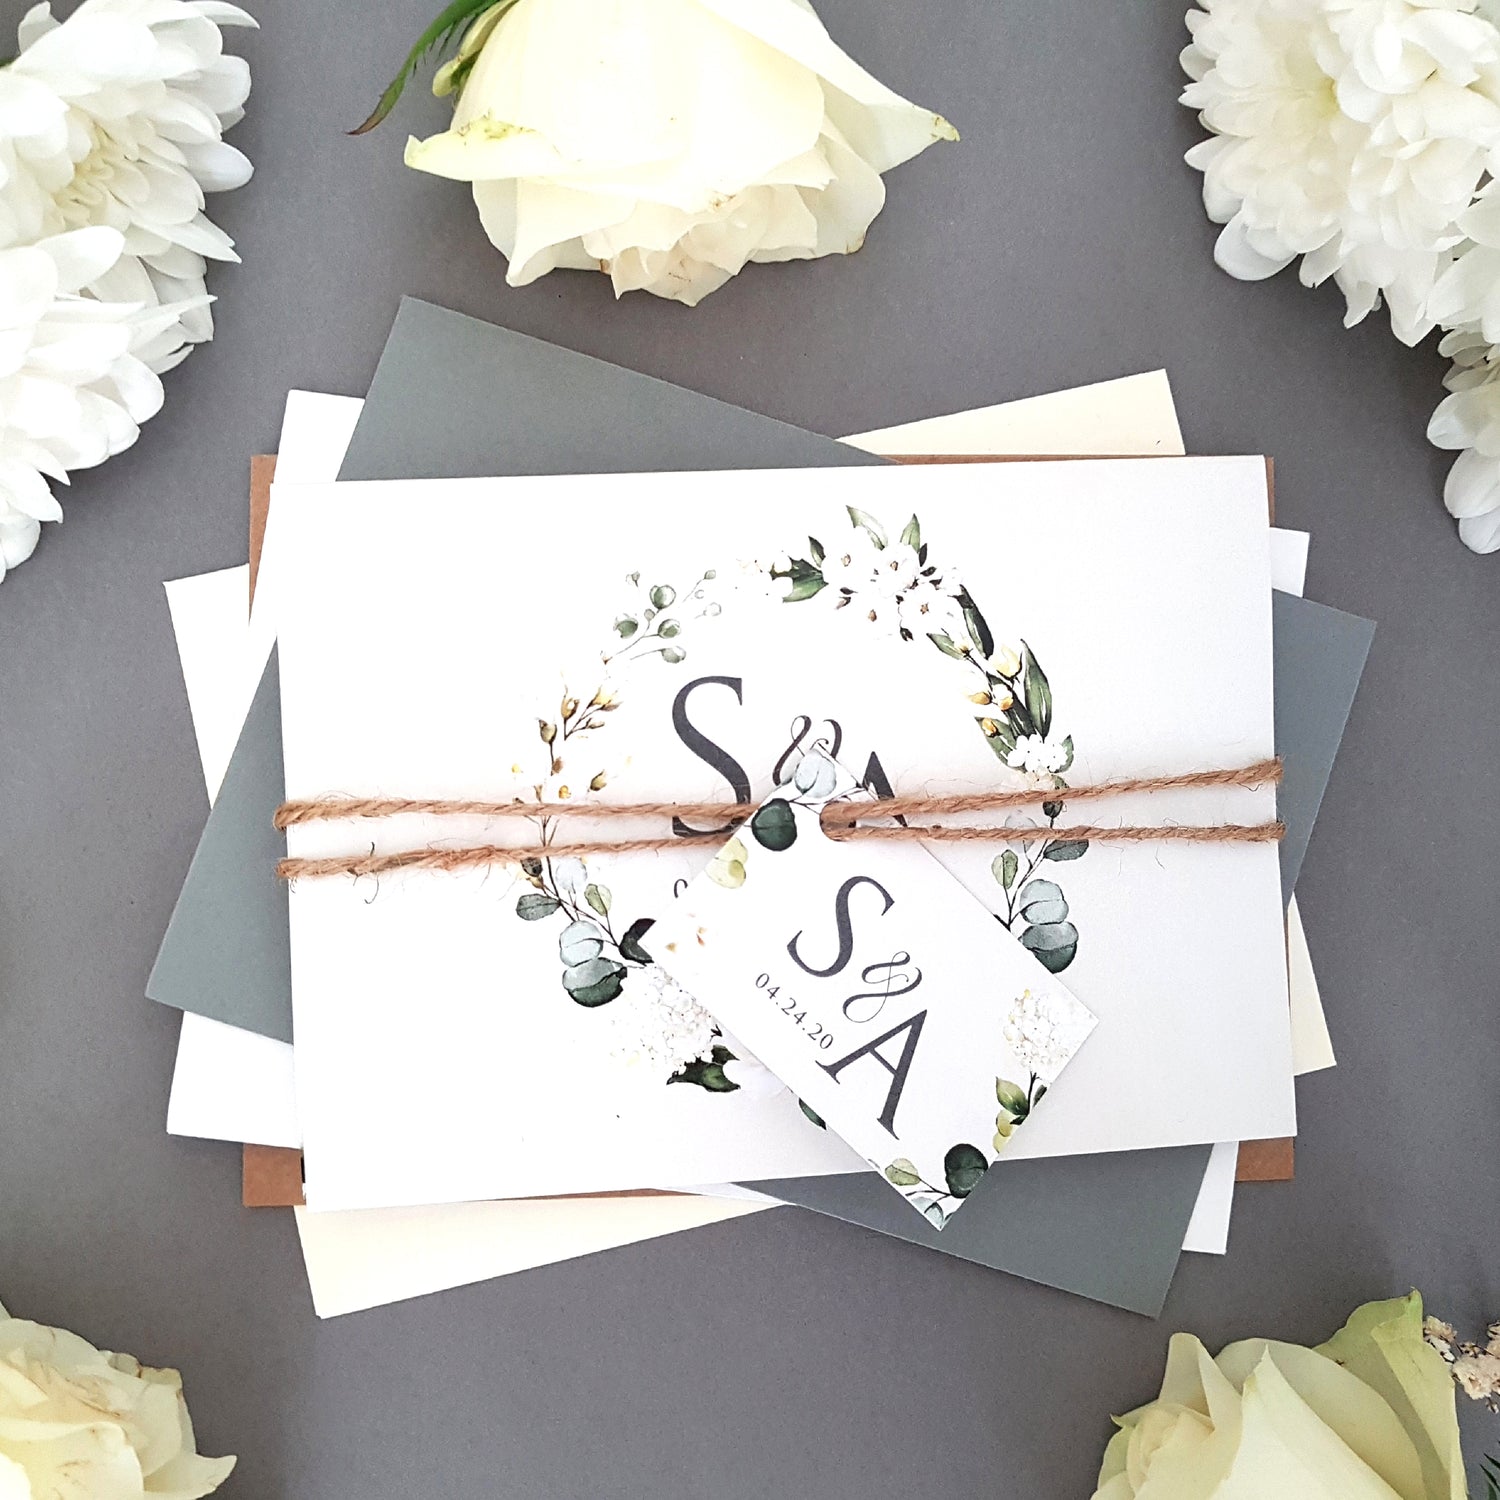 Wedding invitation set featuring an array of white florals with greenery complete with personalised tag, rustic twine and a choice of envelopes. Wedding invite come as a 4 panel concertina printed double sided with gift poem, menu, menu choices and finer details.